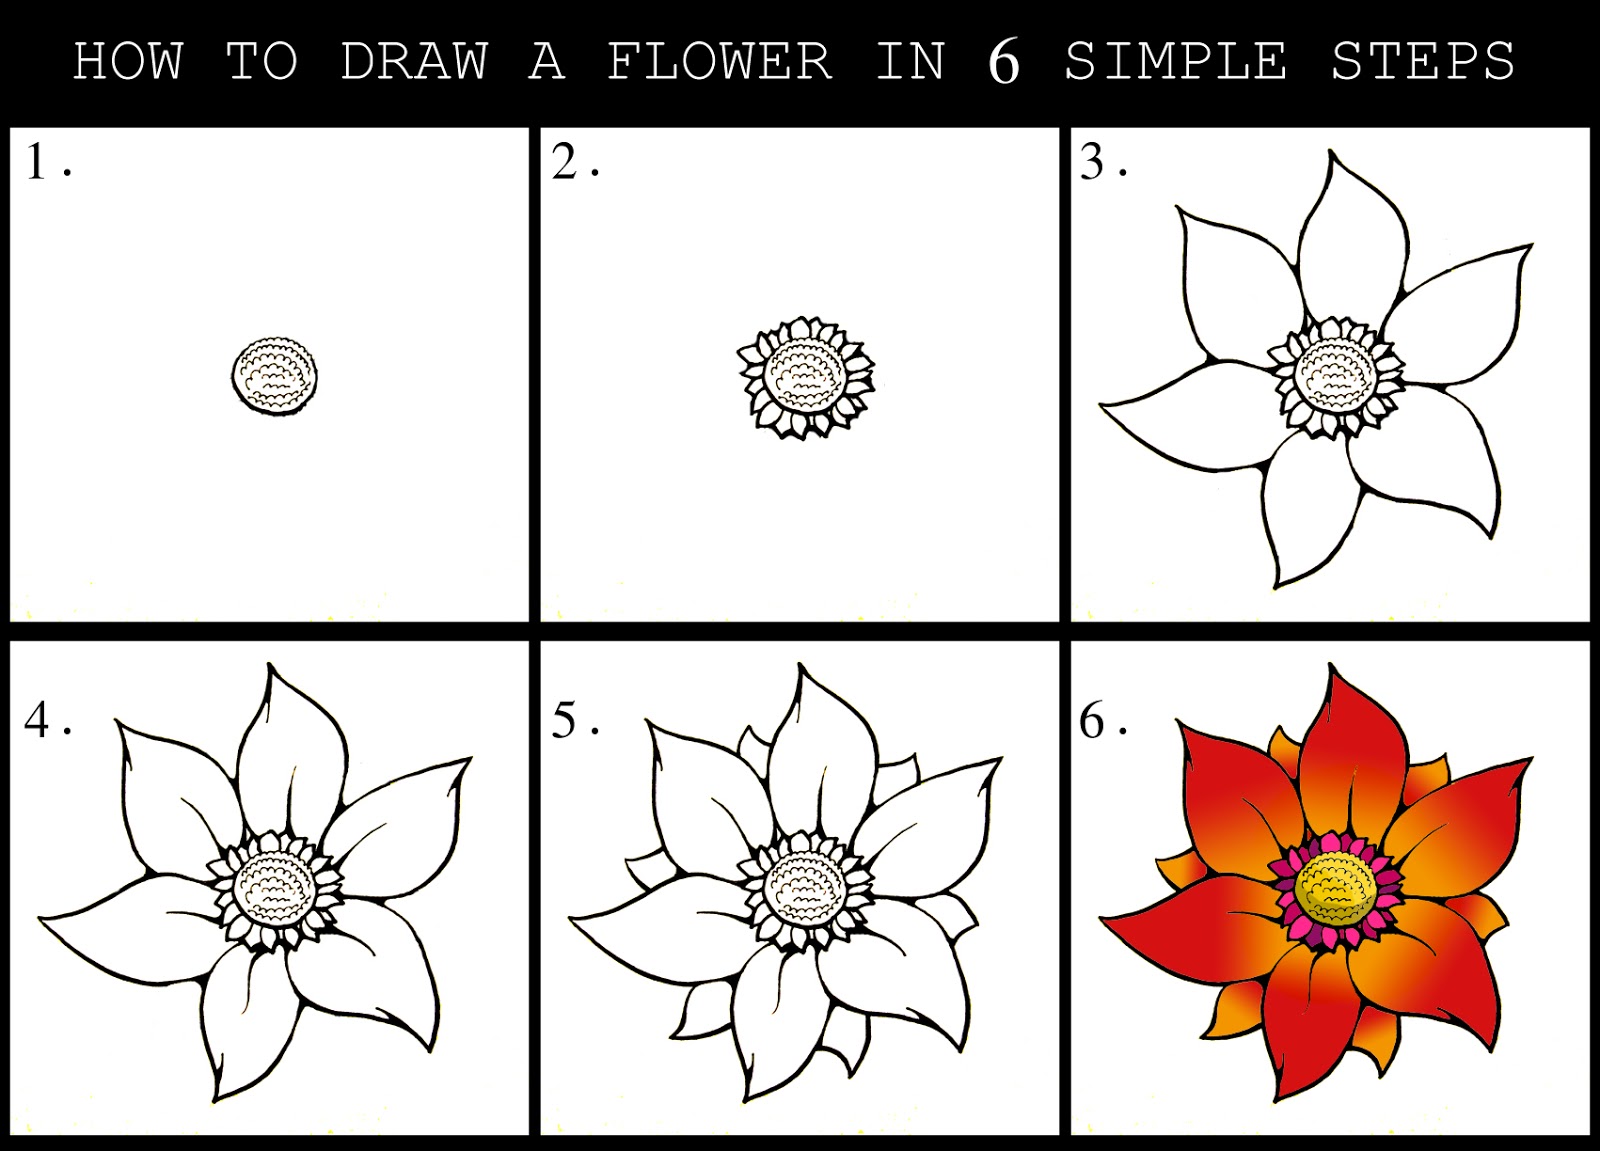 DARYL HOBSON ARTWORK How To Draw A Flower Step By Step Guide